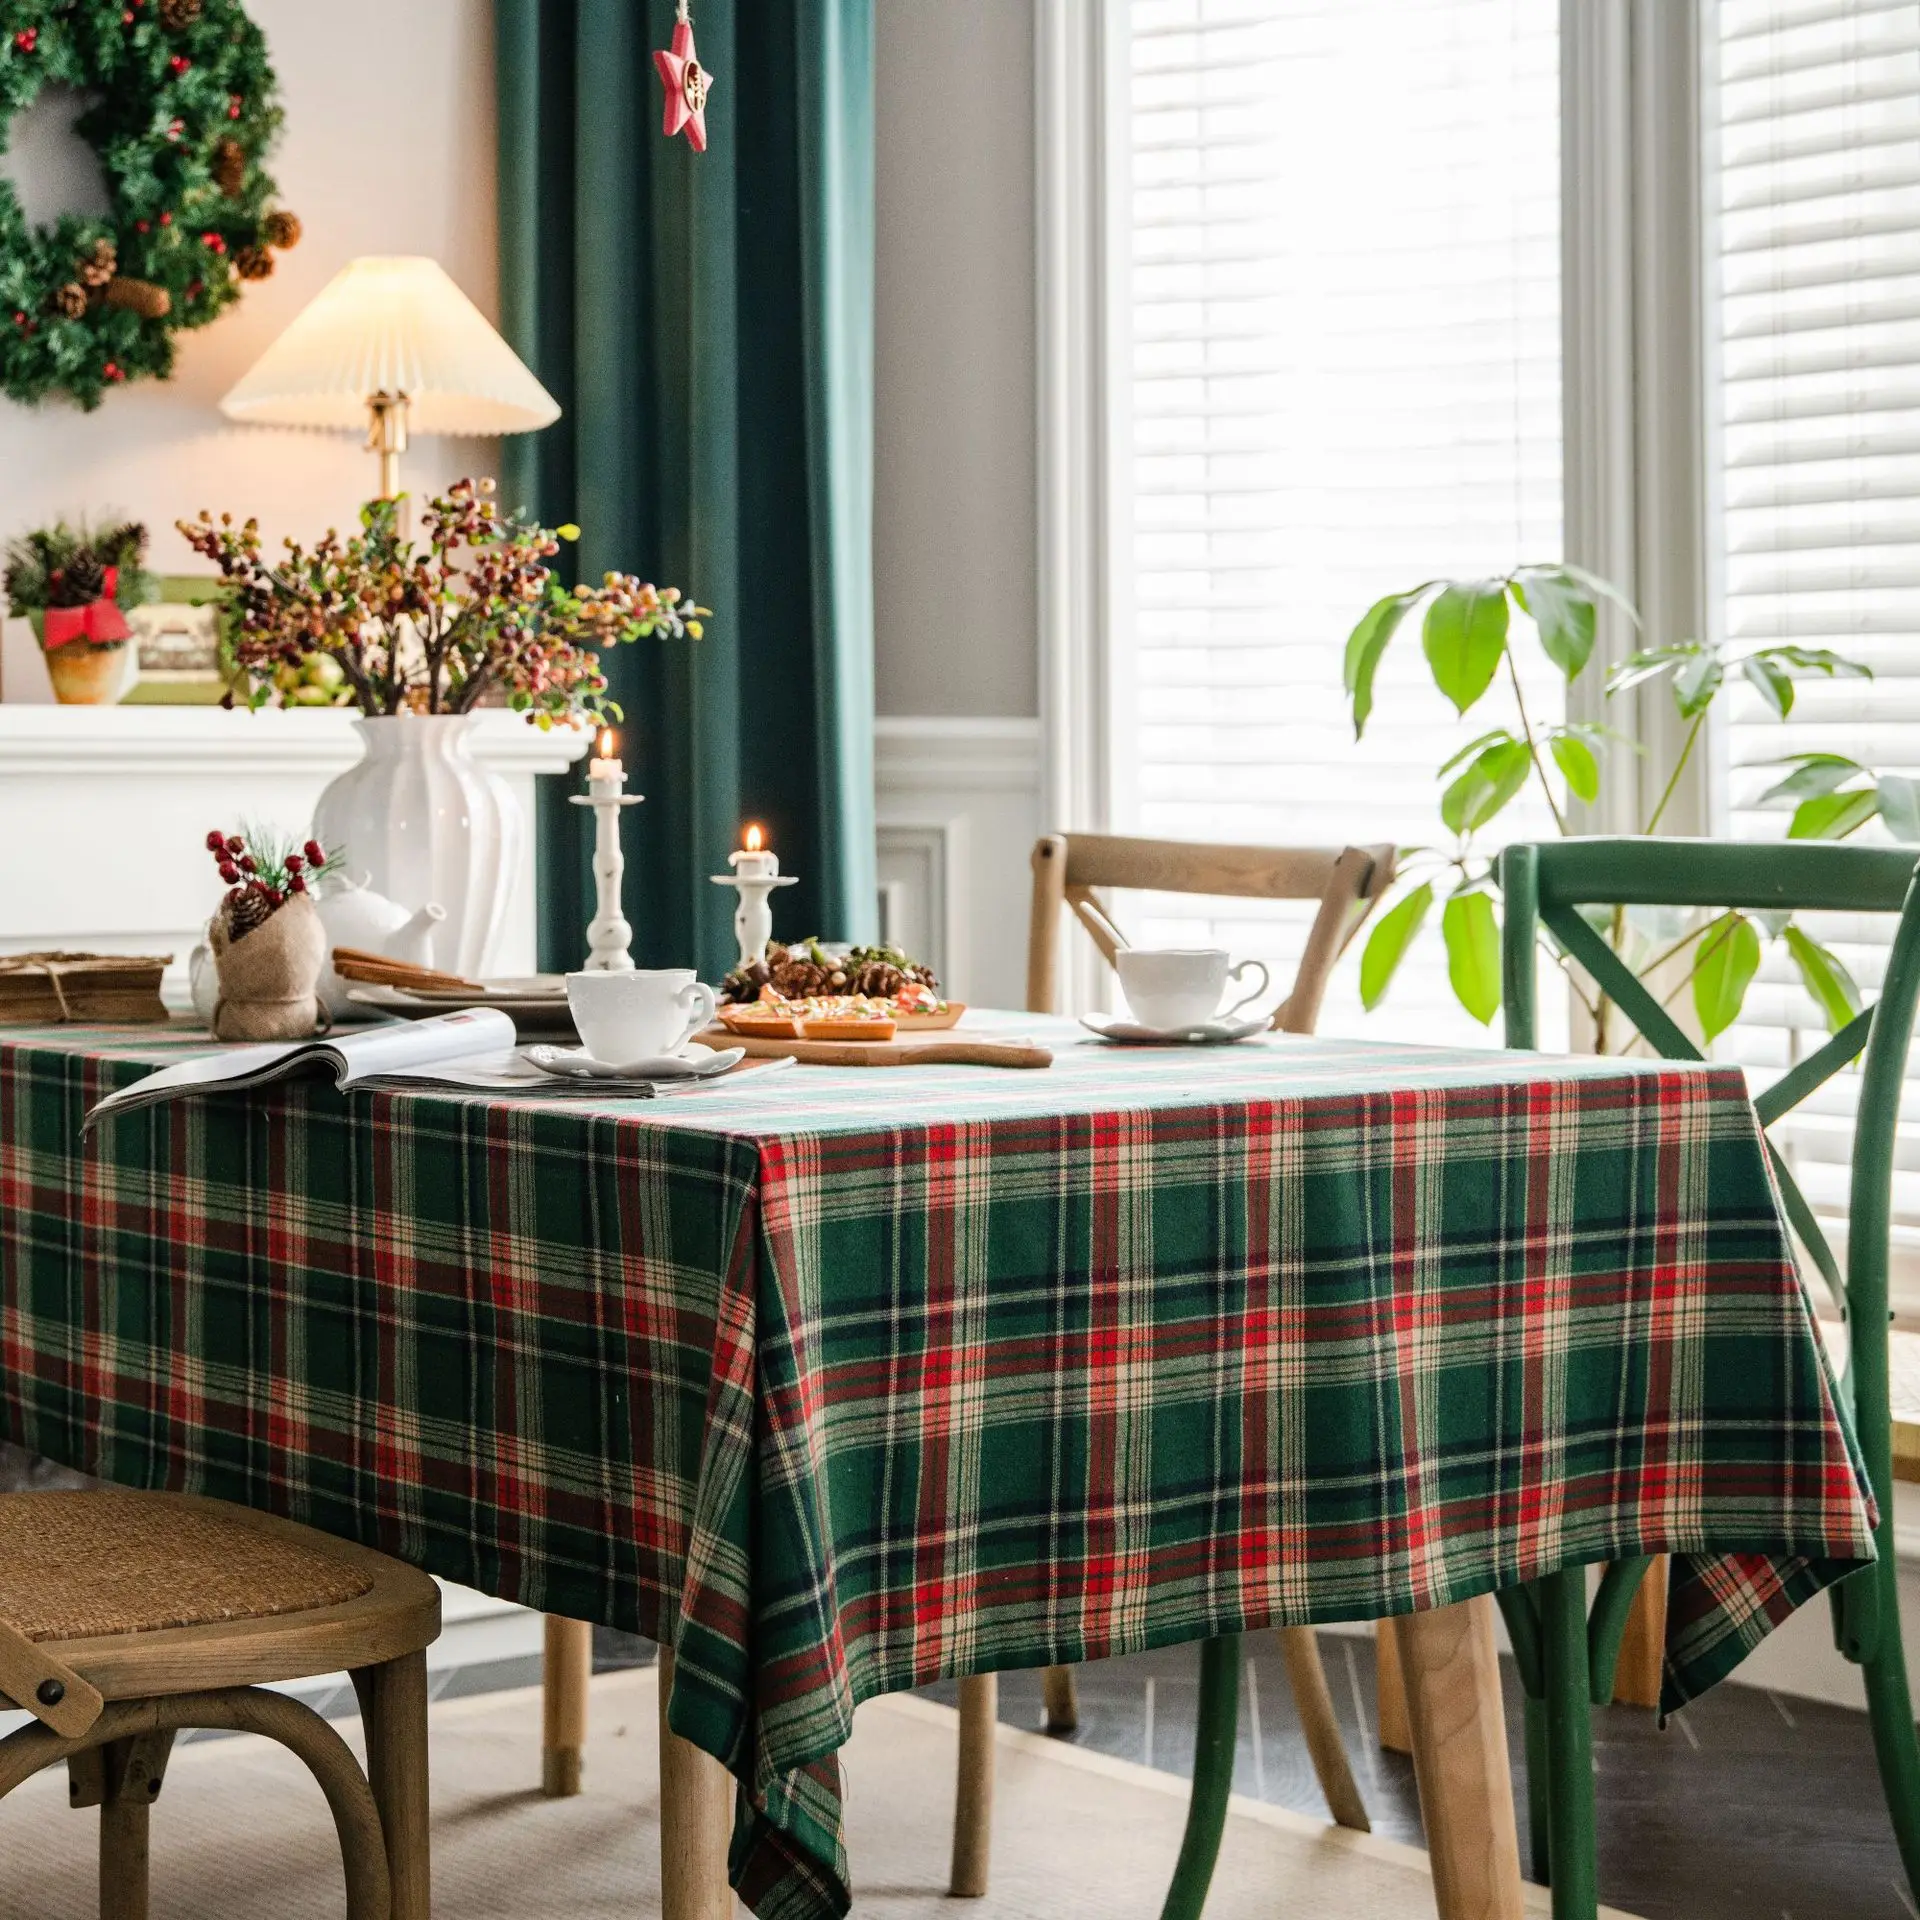 

Cotton Green Yarn Dyed Plaid Grid Table Cloth Rectangular Vintage Dustproof Home Kitchen Party Christmas Banquet Table Cover